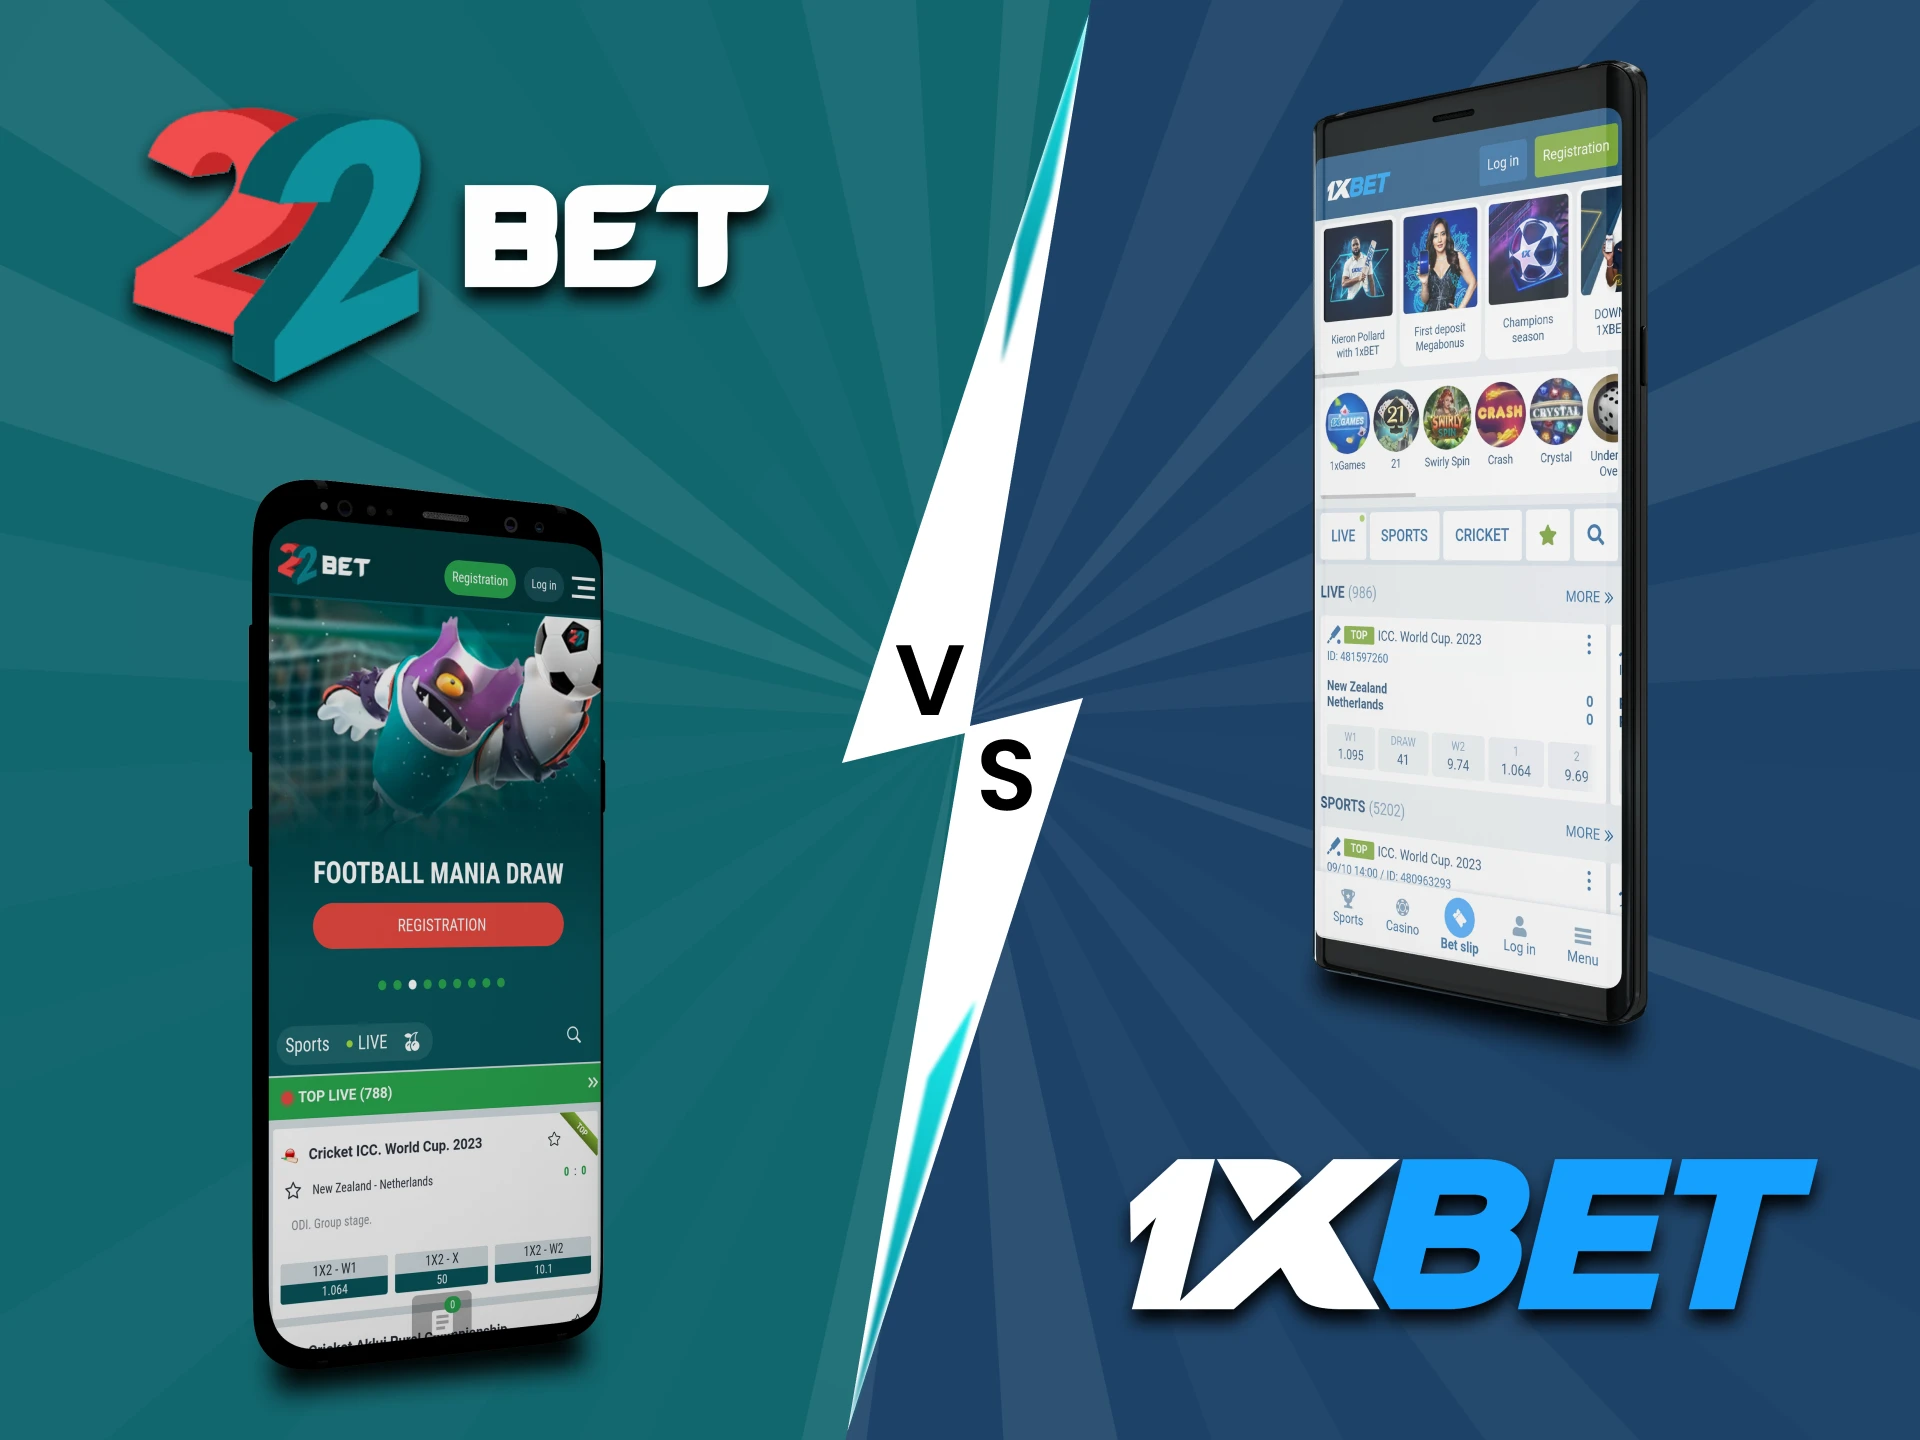 Place bets through the 22bet or 1xbet application.